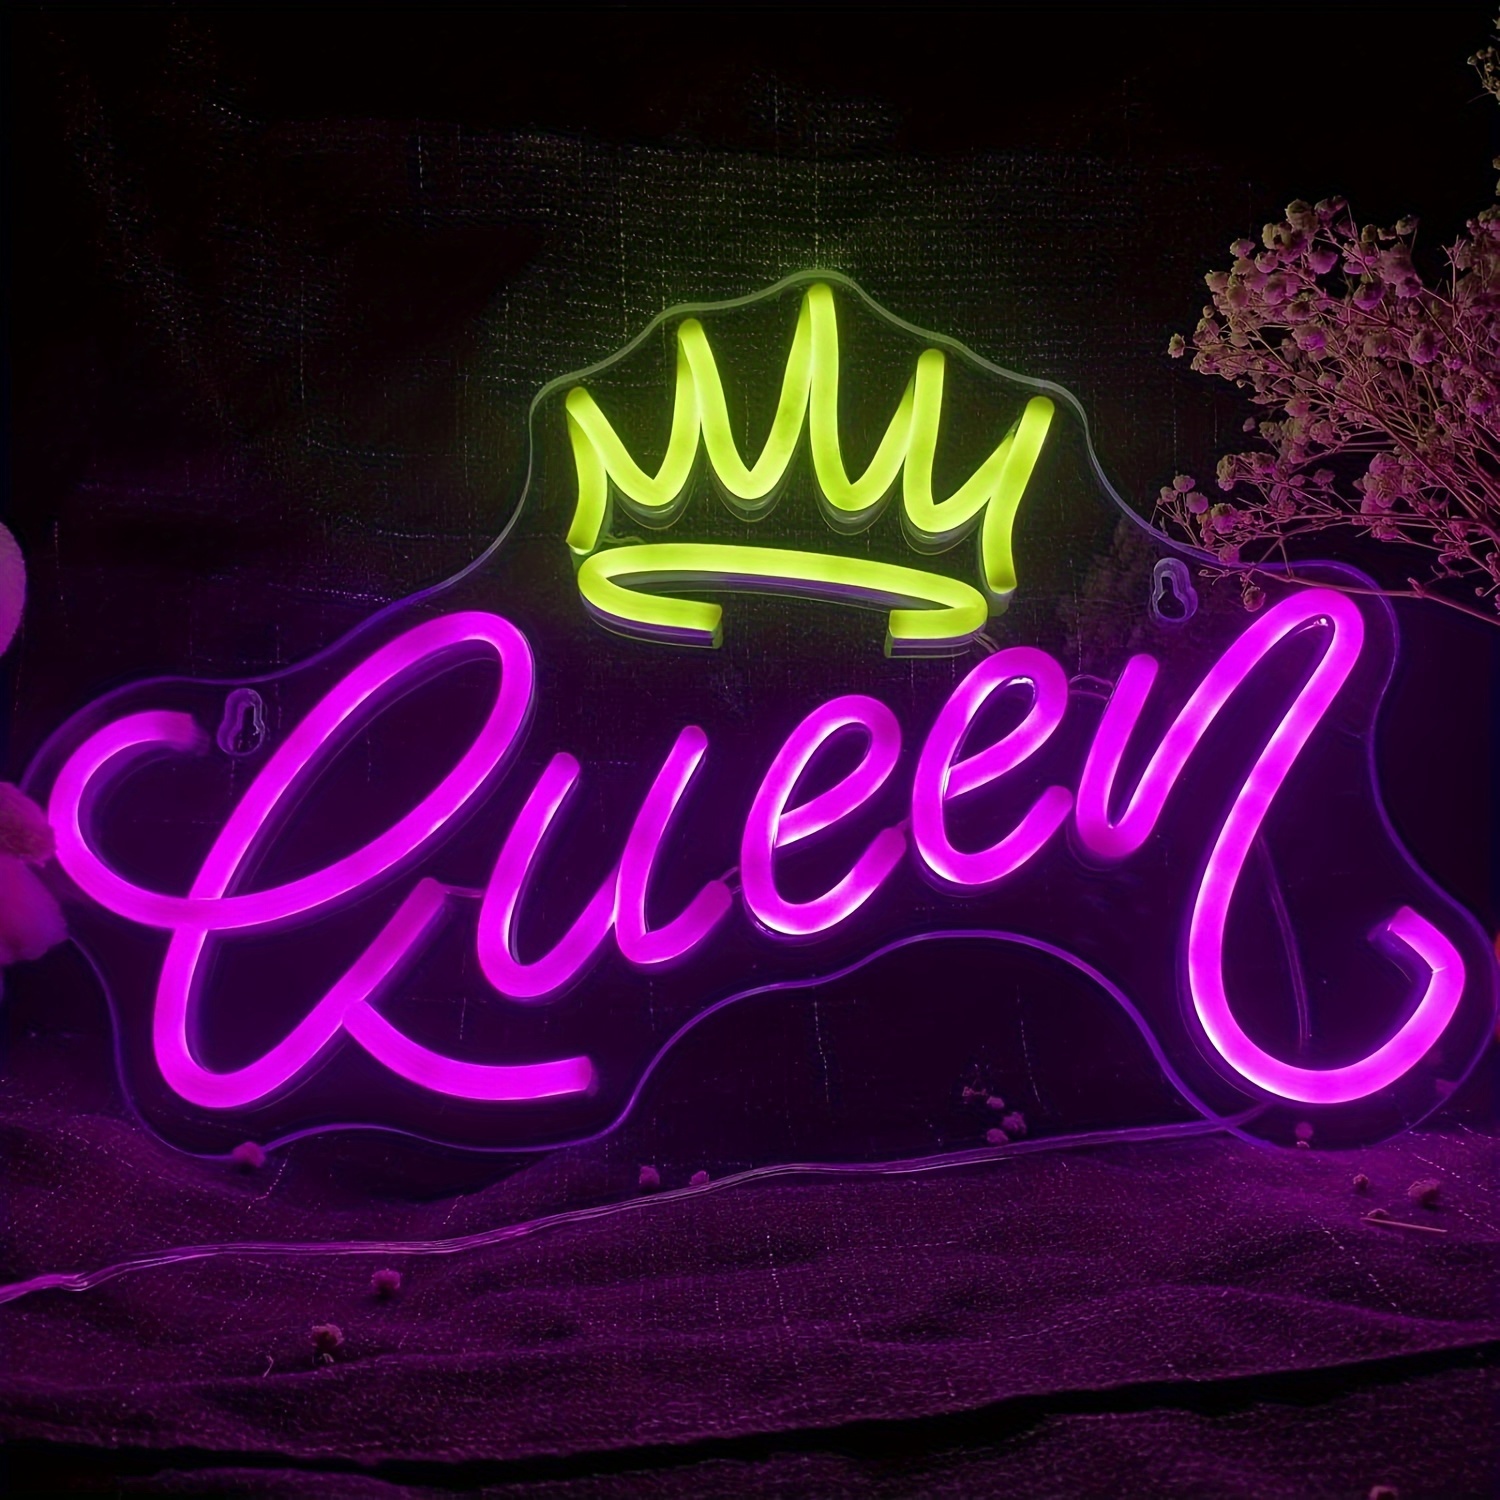 

Queen Neon Signs For Wall Decor, Crown Neon Light Sign Decor, Queen Led Neon Sign For Bedroom Wall Kid Room Living Room Wedding Party Bar Christmas Gift